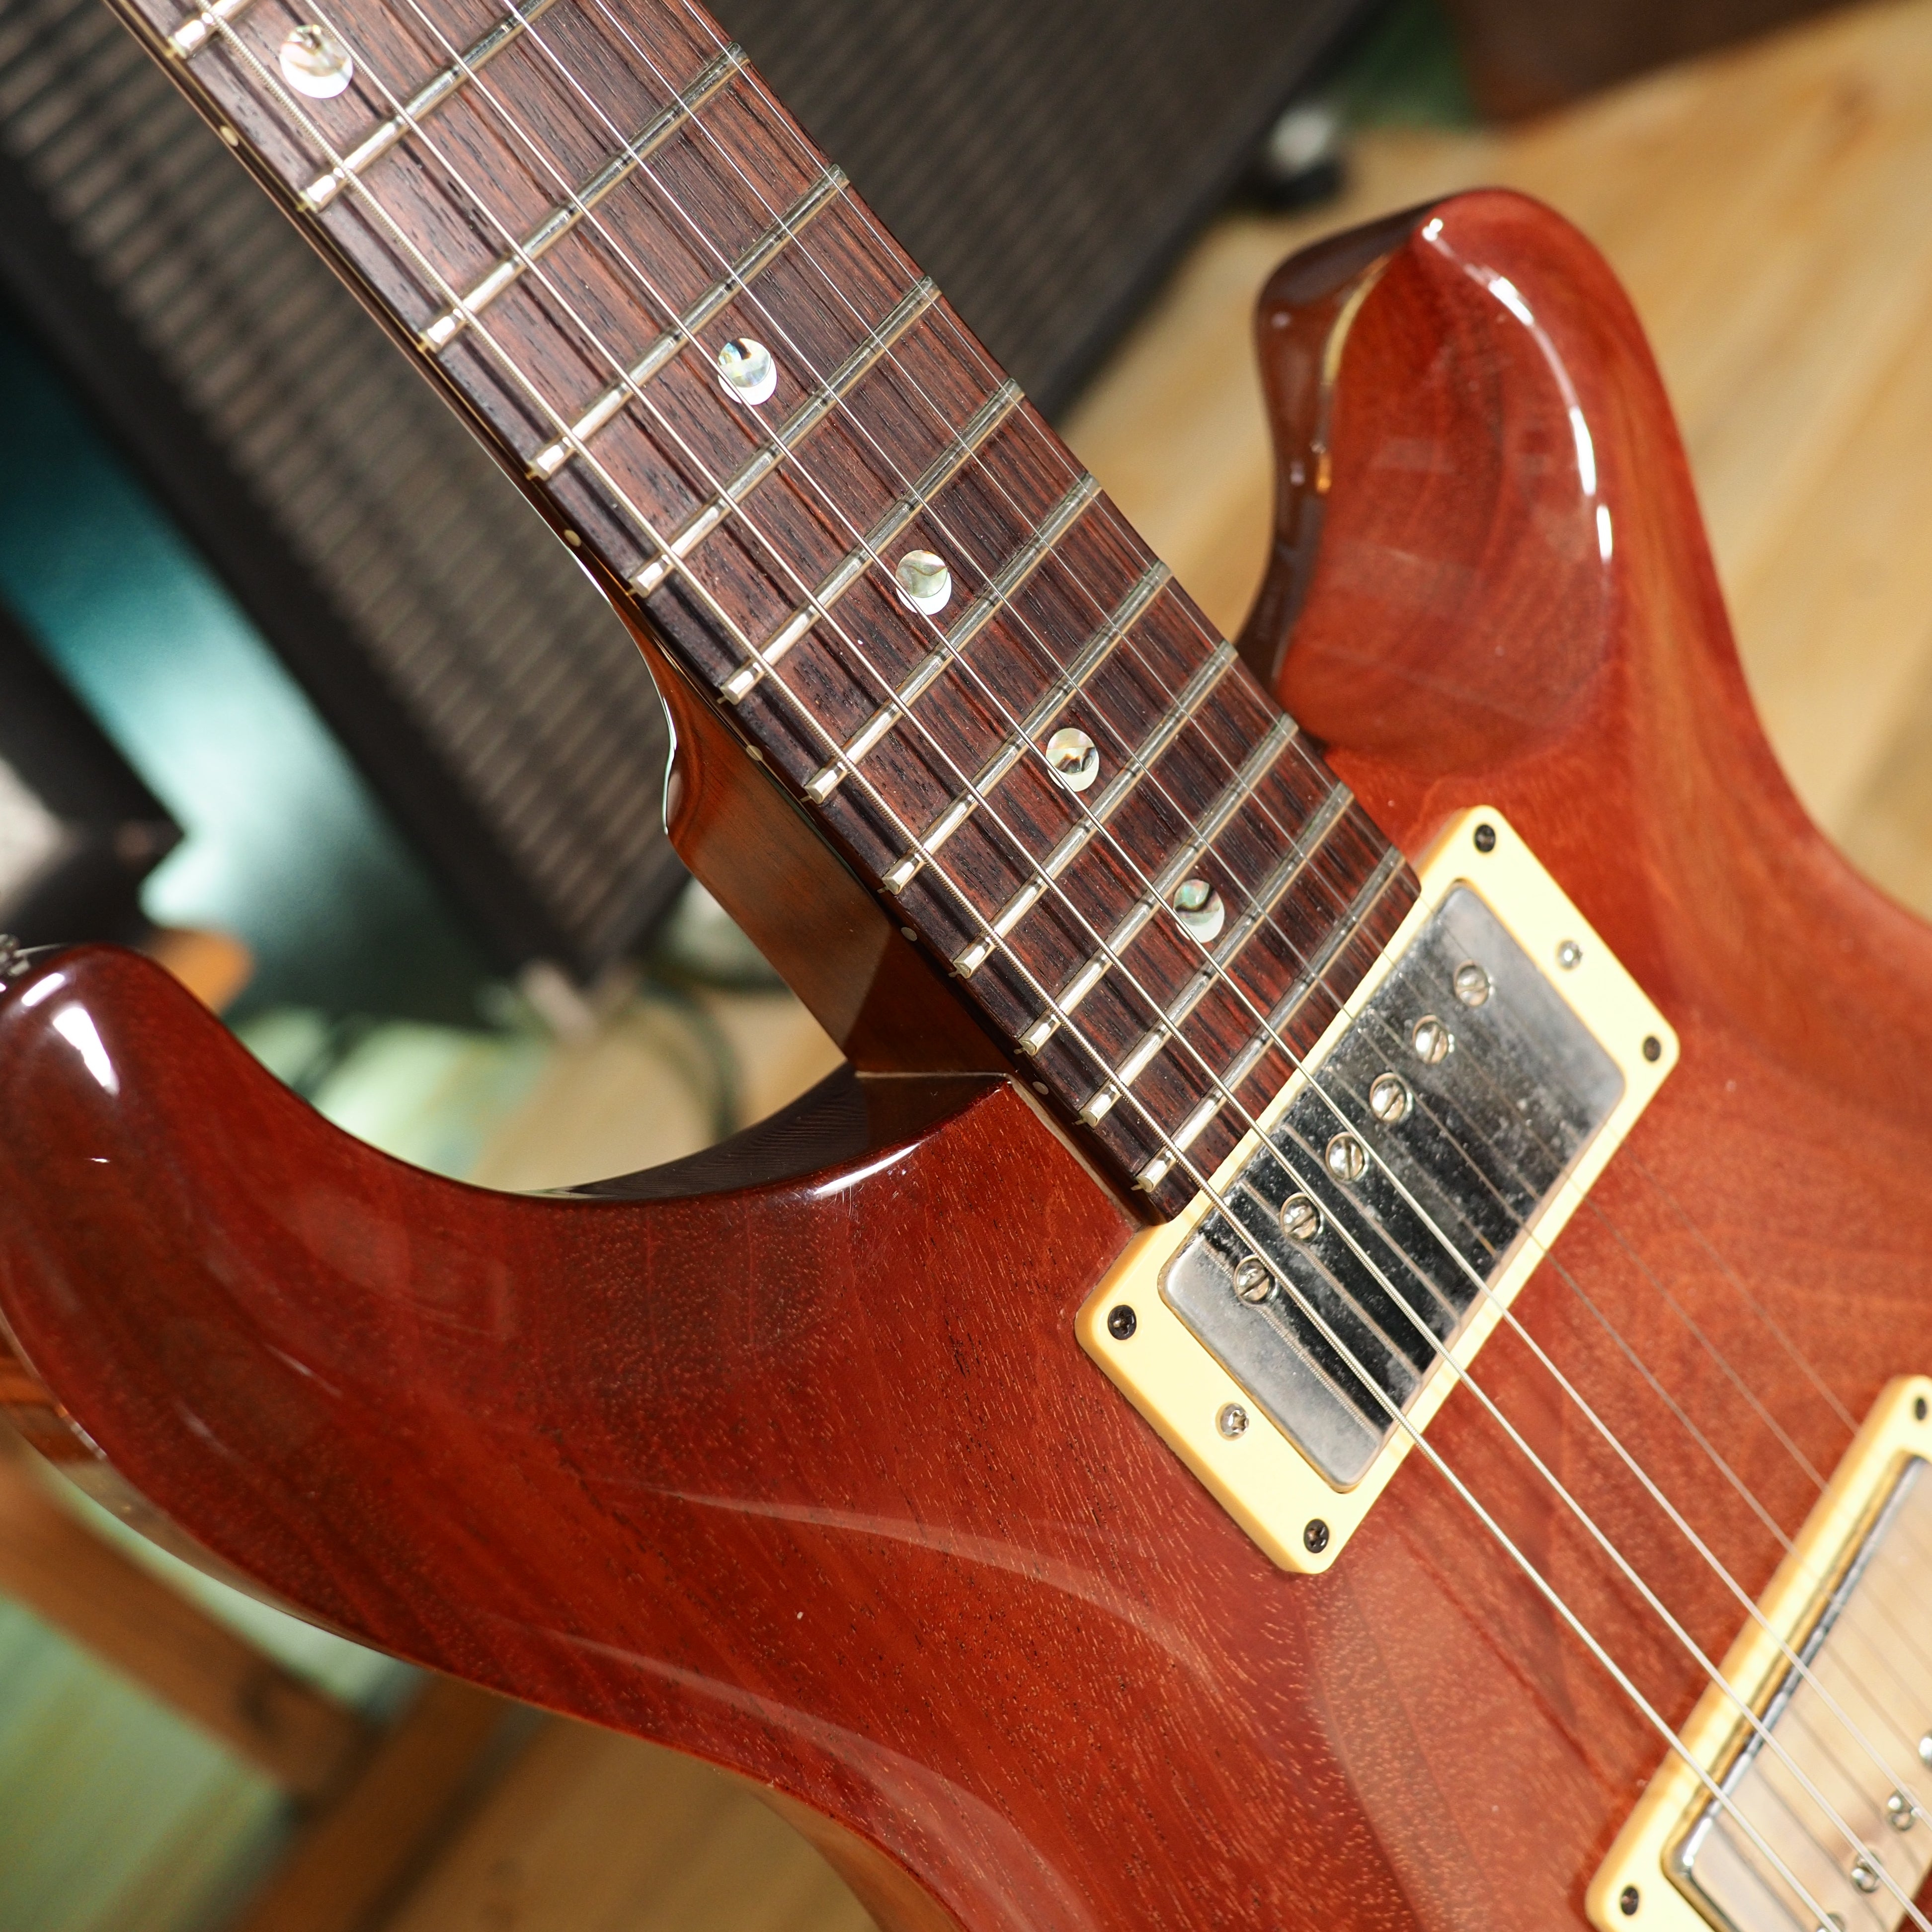 PRS McCarty from 2001 - one piece body!